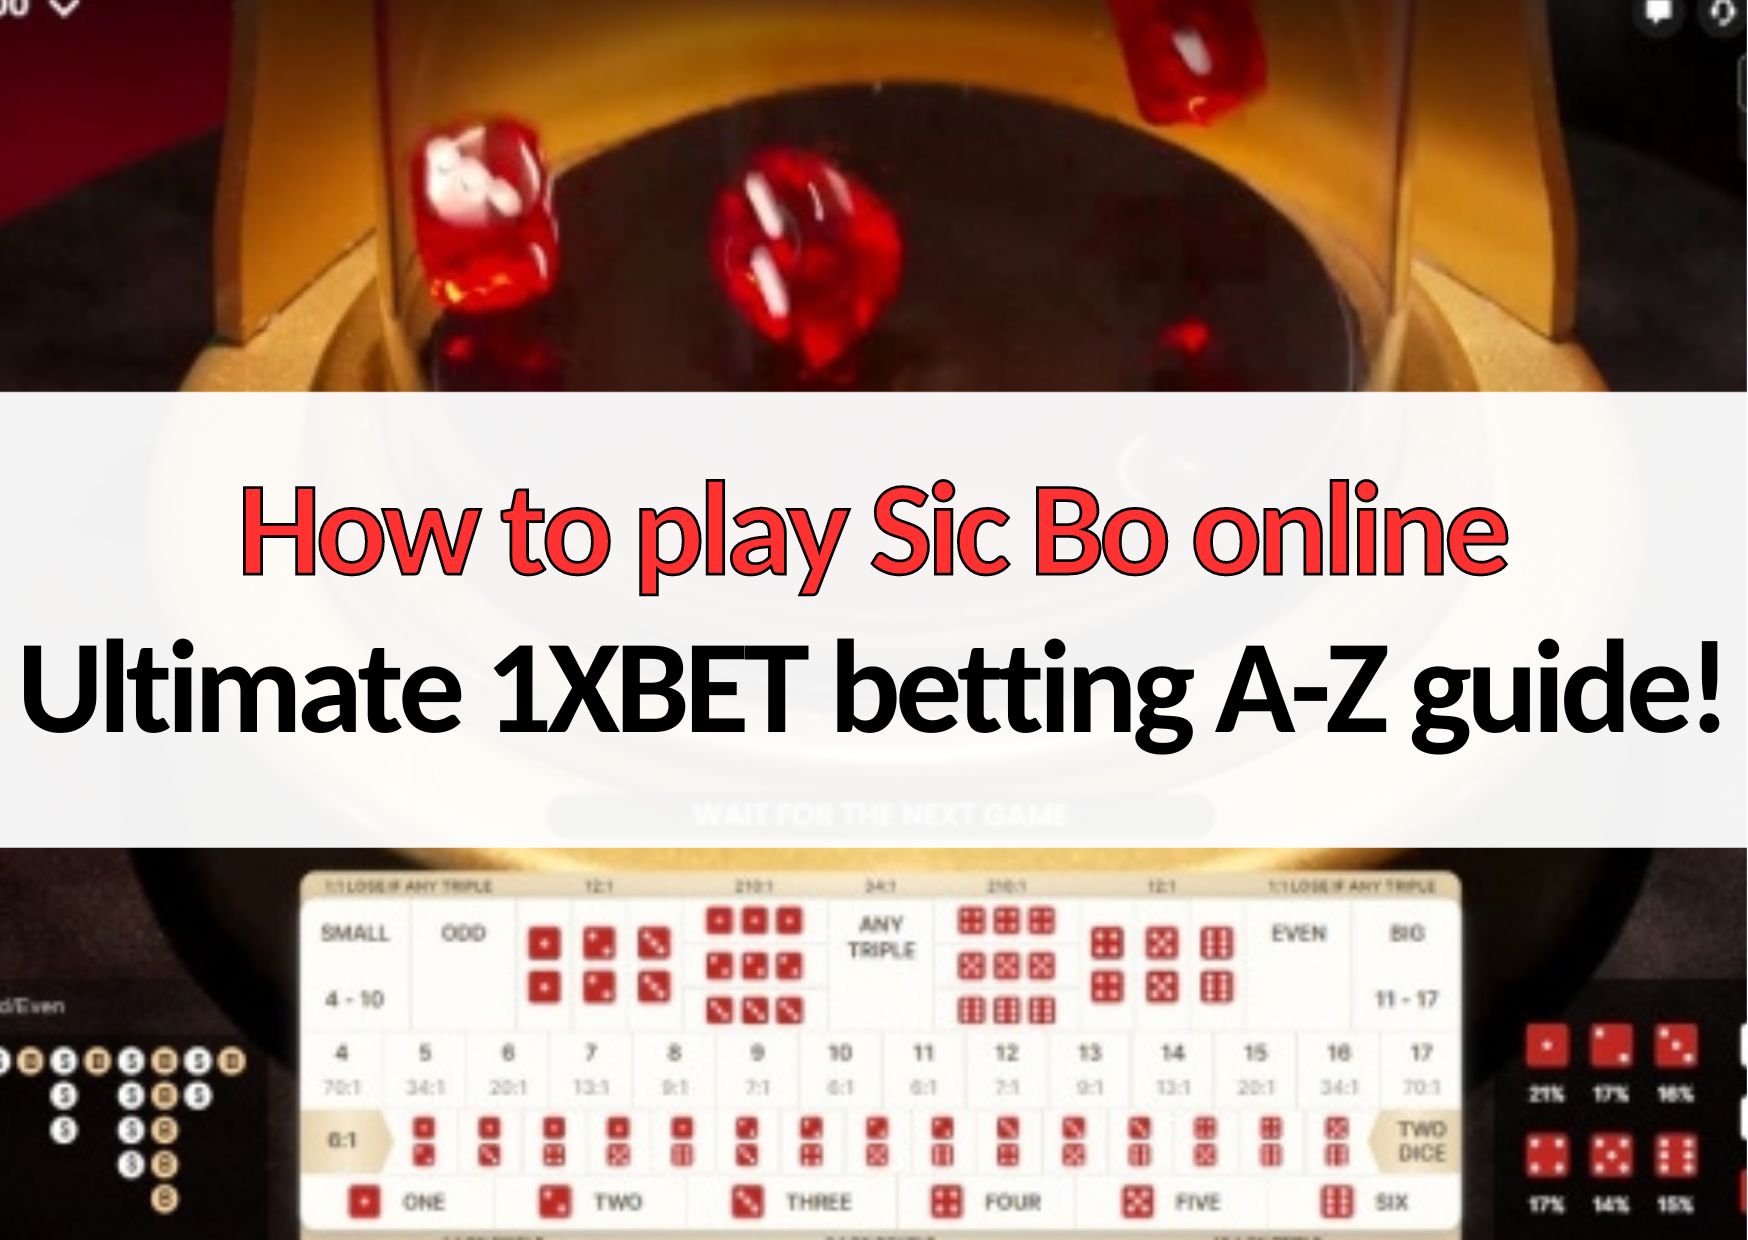 how to play sic bo online ultimate 1xbet betting guide